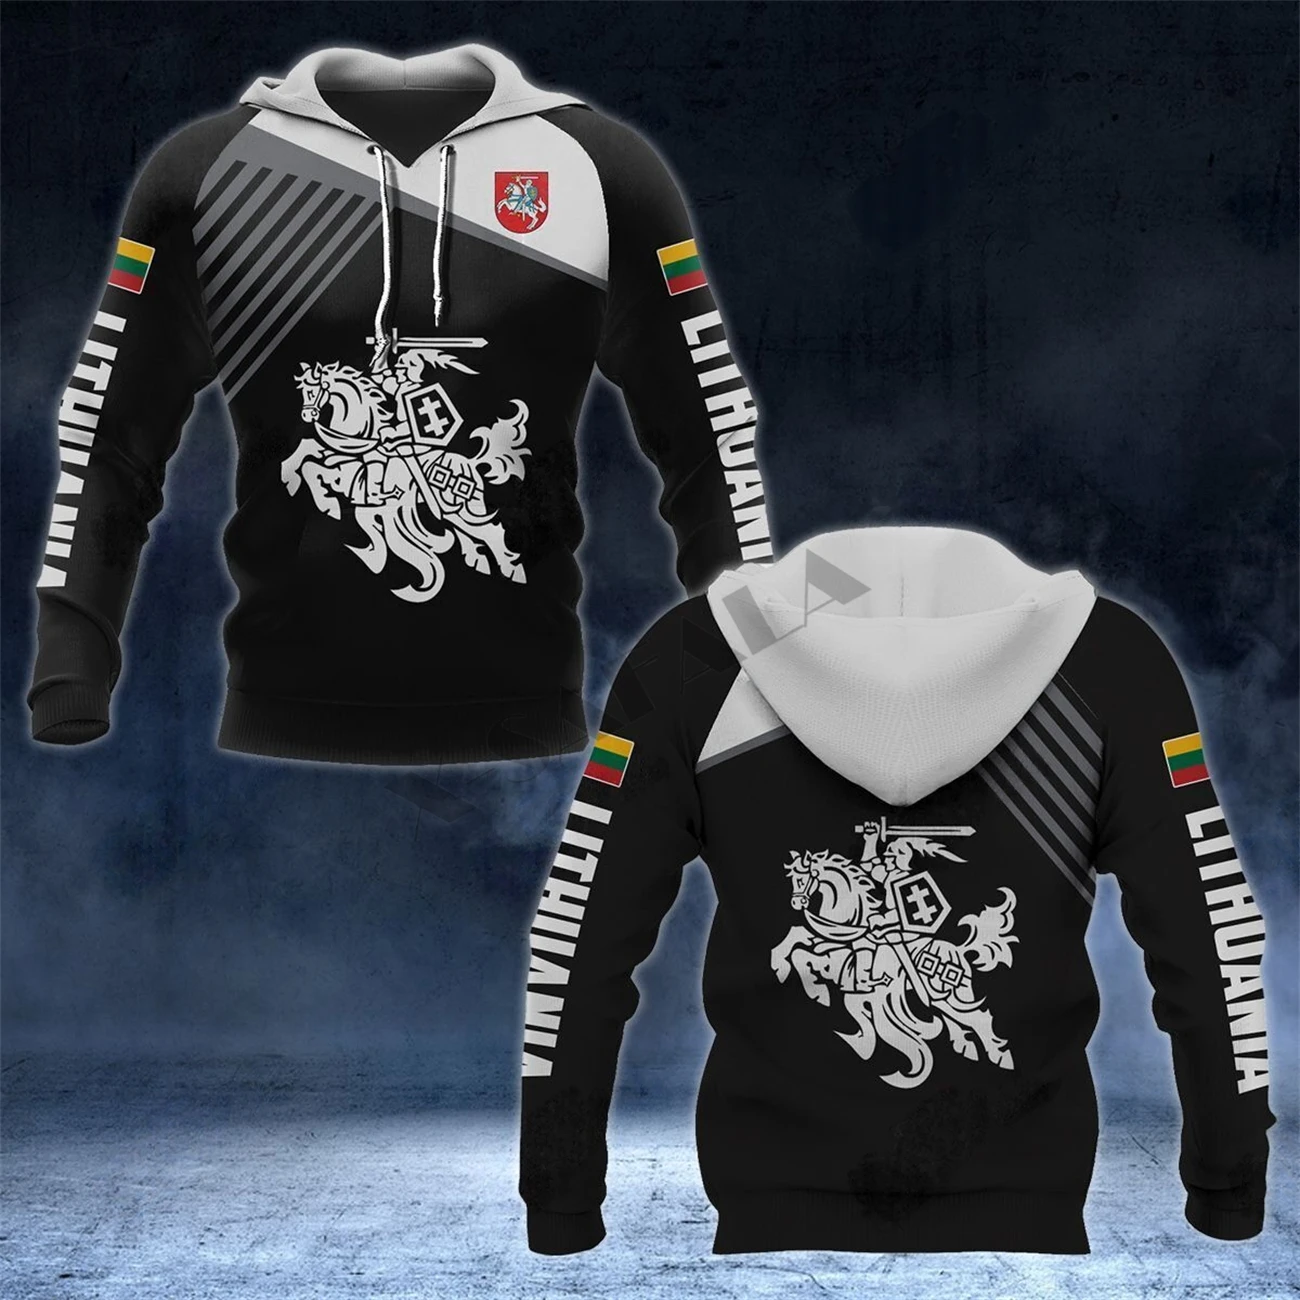 

LITHUANIA COAT OF ARMS WHITE FLAG 3D Full Print Zipper Hoodie Men Pullover Sweatshirt Hooded Jersey Tracksuits Outwear Coat